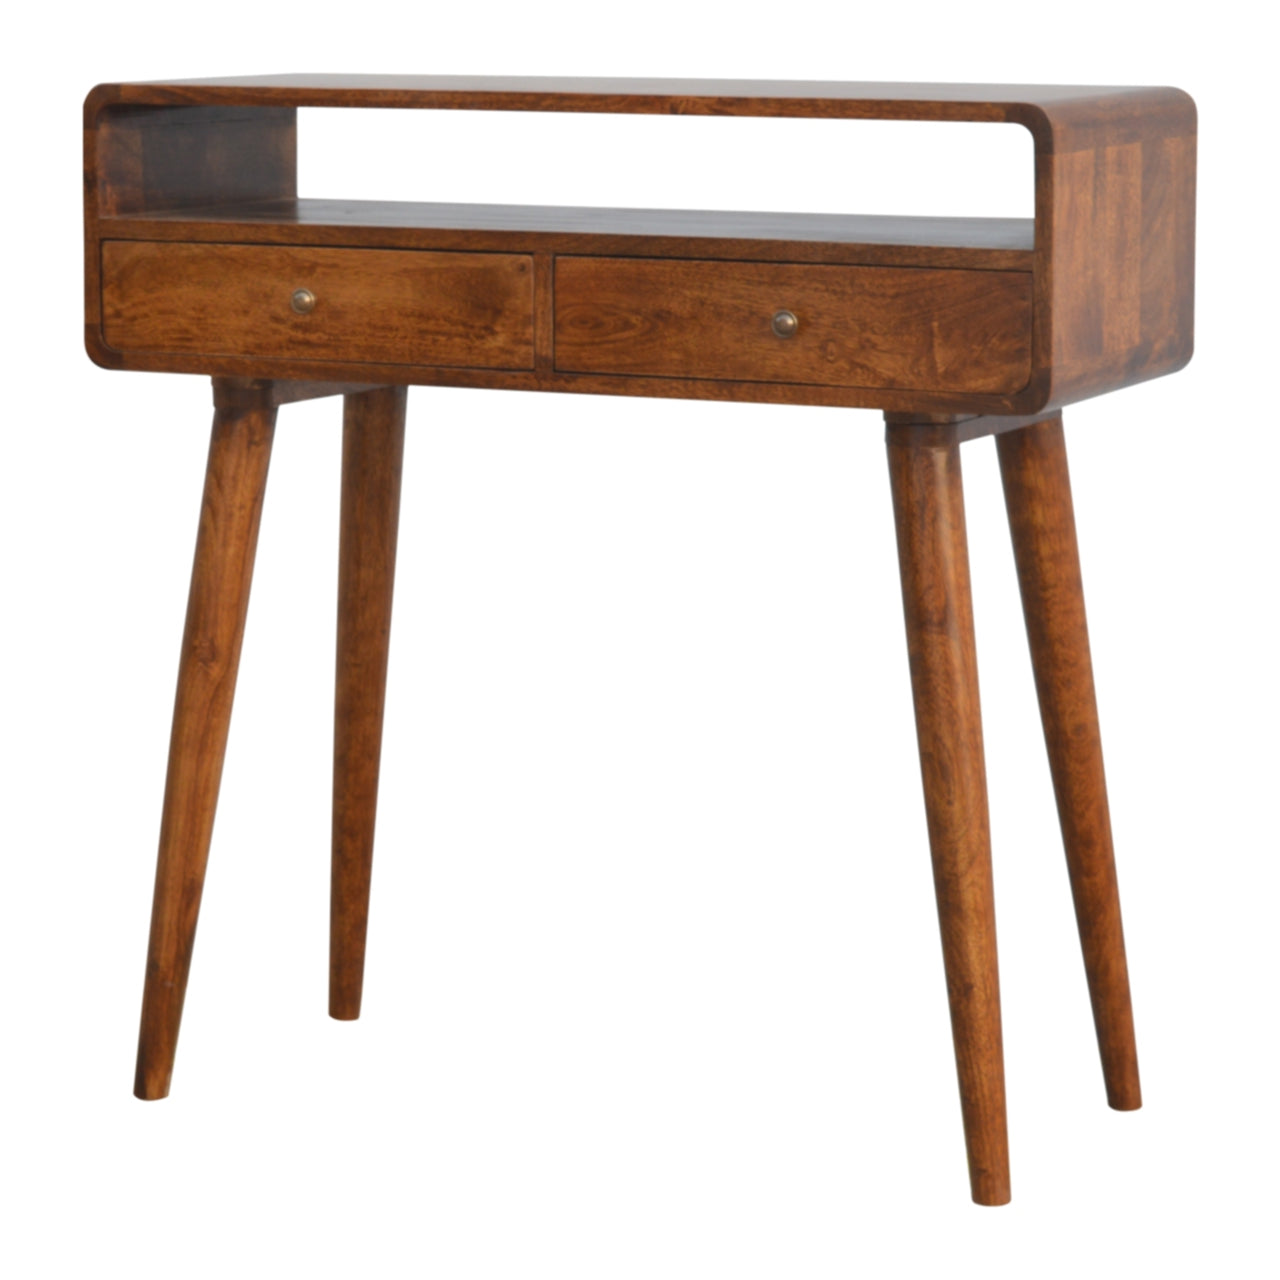 Curved Chestnut Console Table by Artisan Furniture